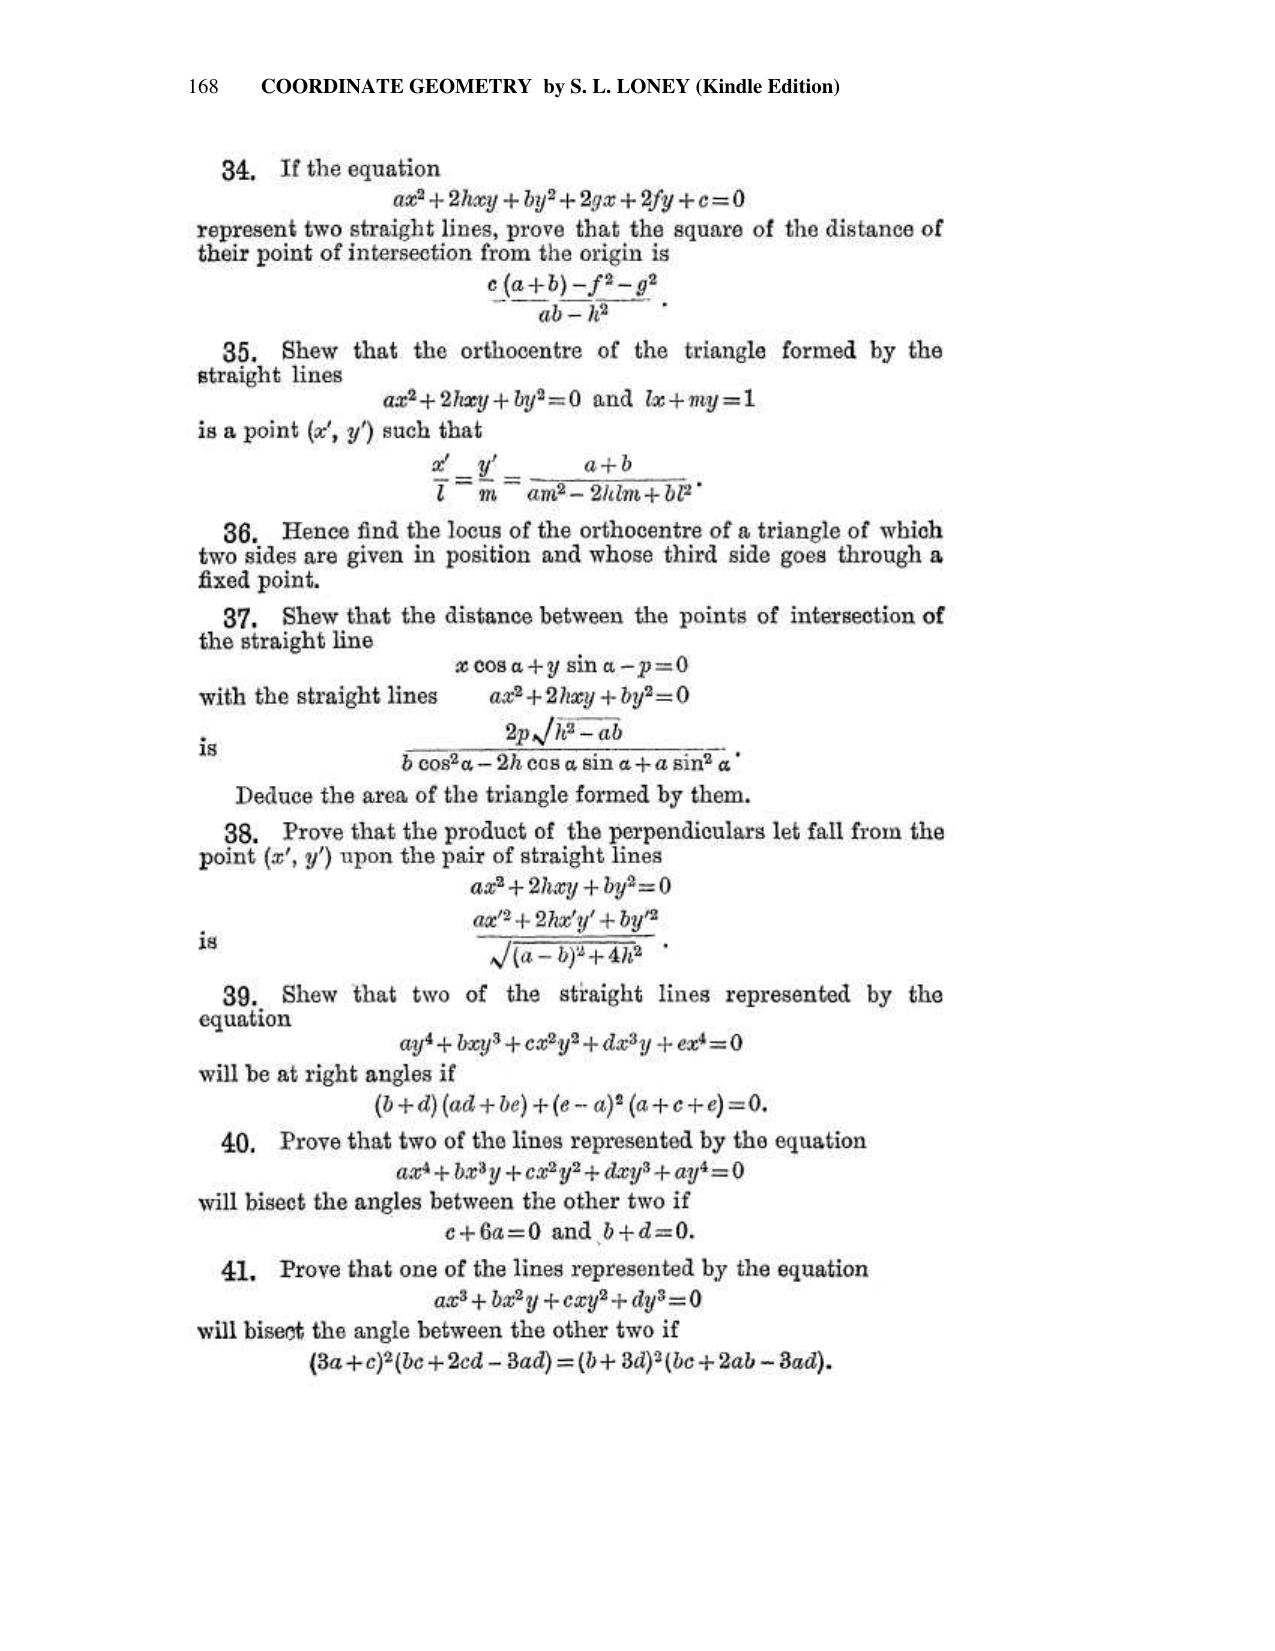 Chapter 6: On Equations Representing Two or More Straight Lines - SL Loney Solutions: The Elements of Coordinate Geometry - Page 29